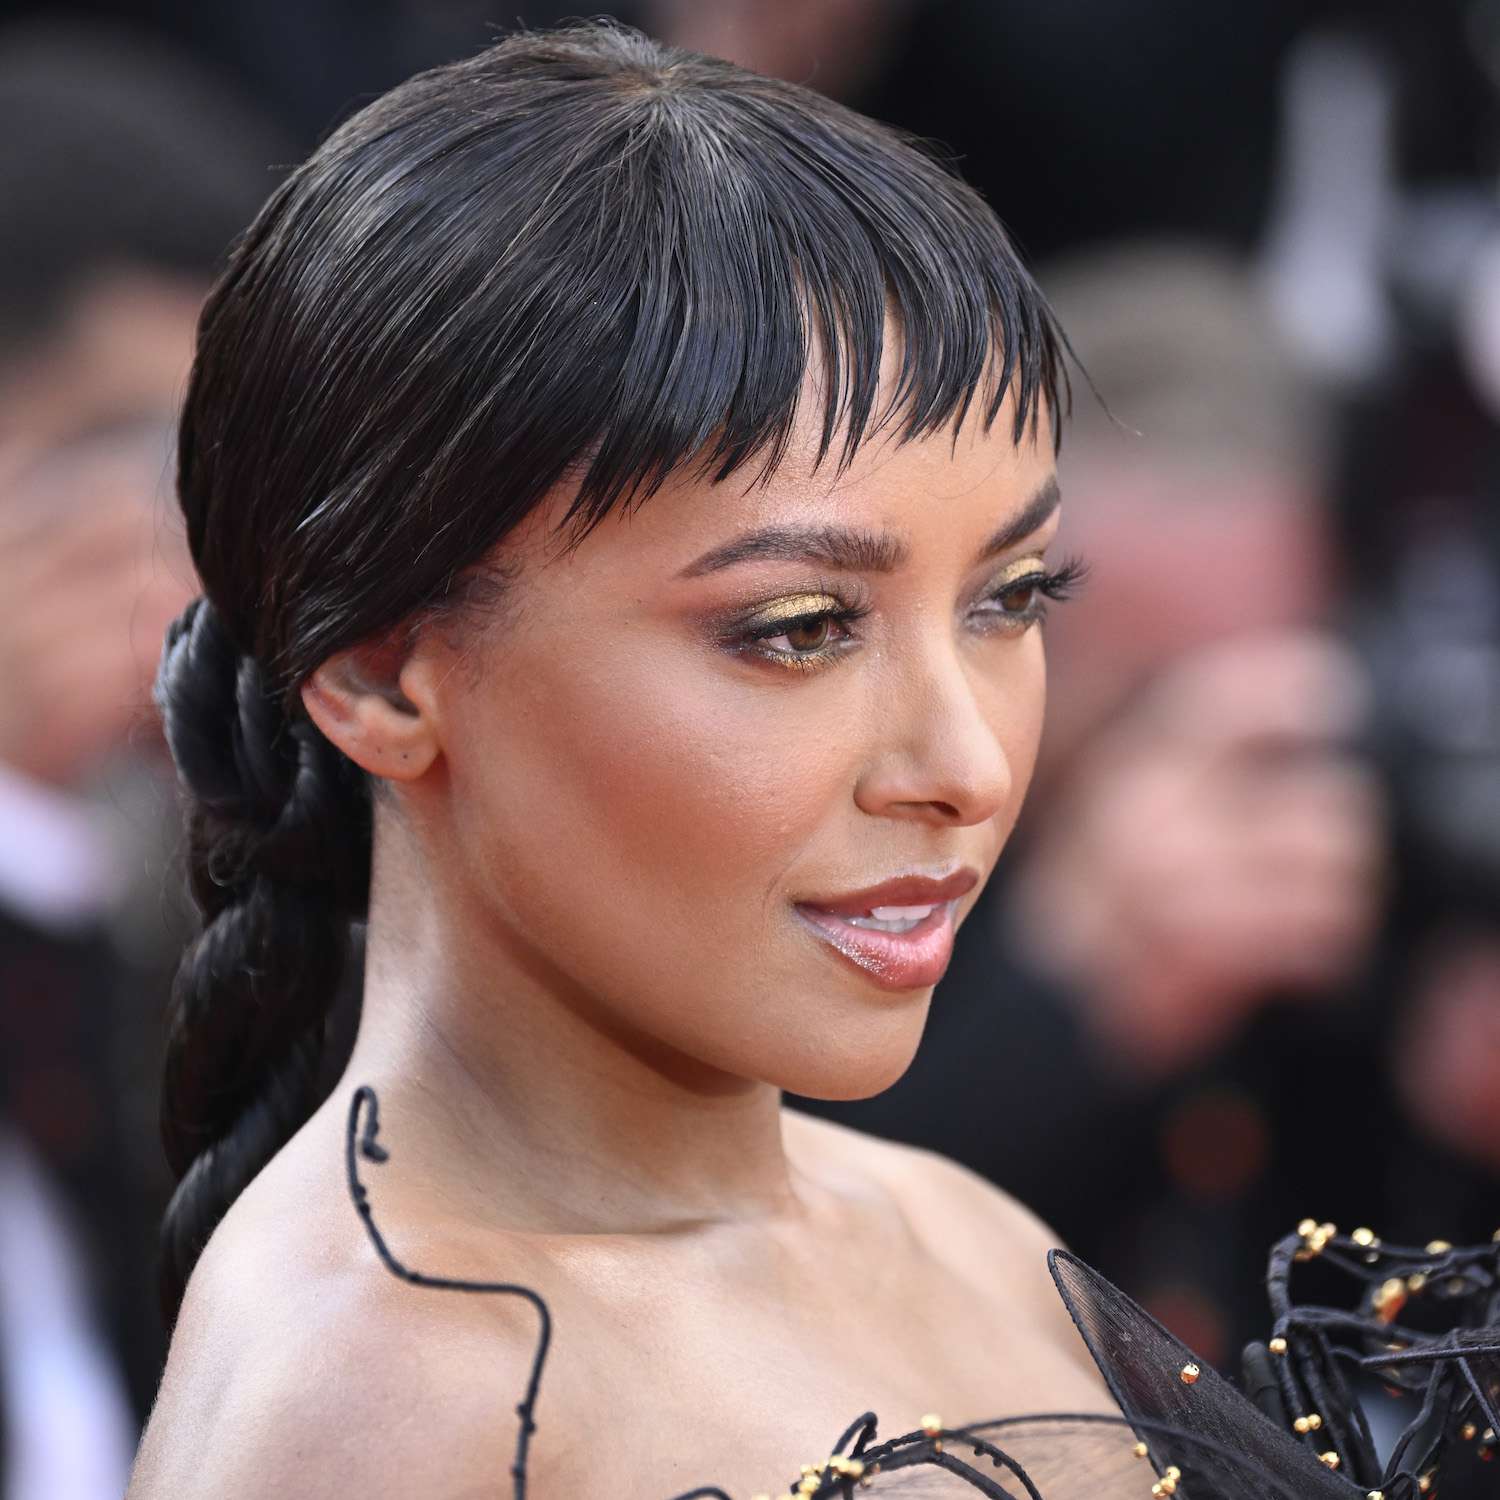 Kat Graham wears piece-y baby bangs with a long rope braid hairstyle